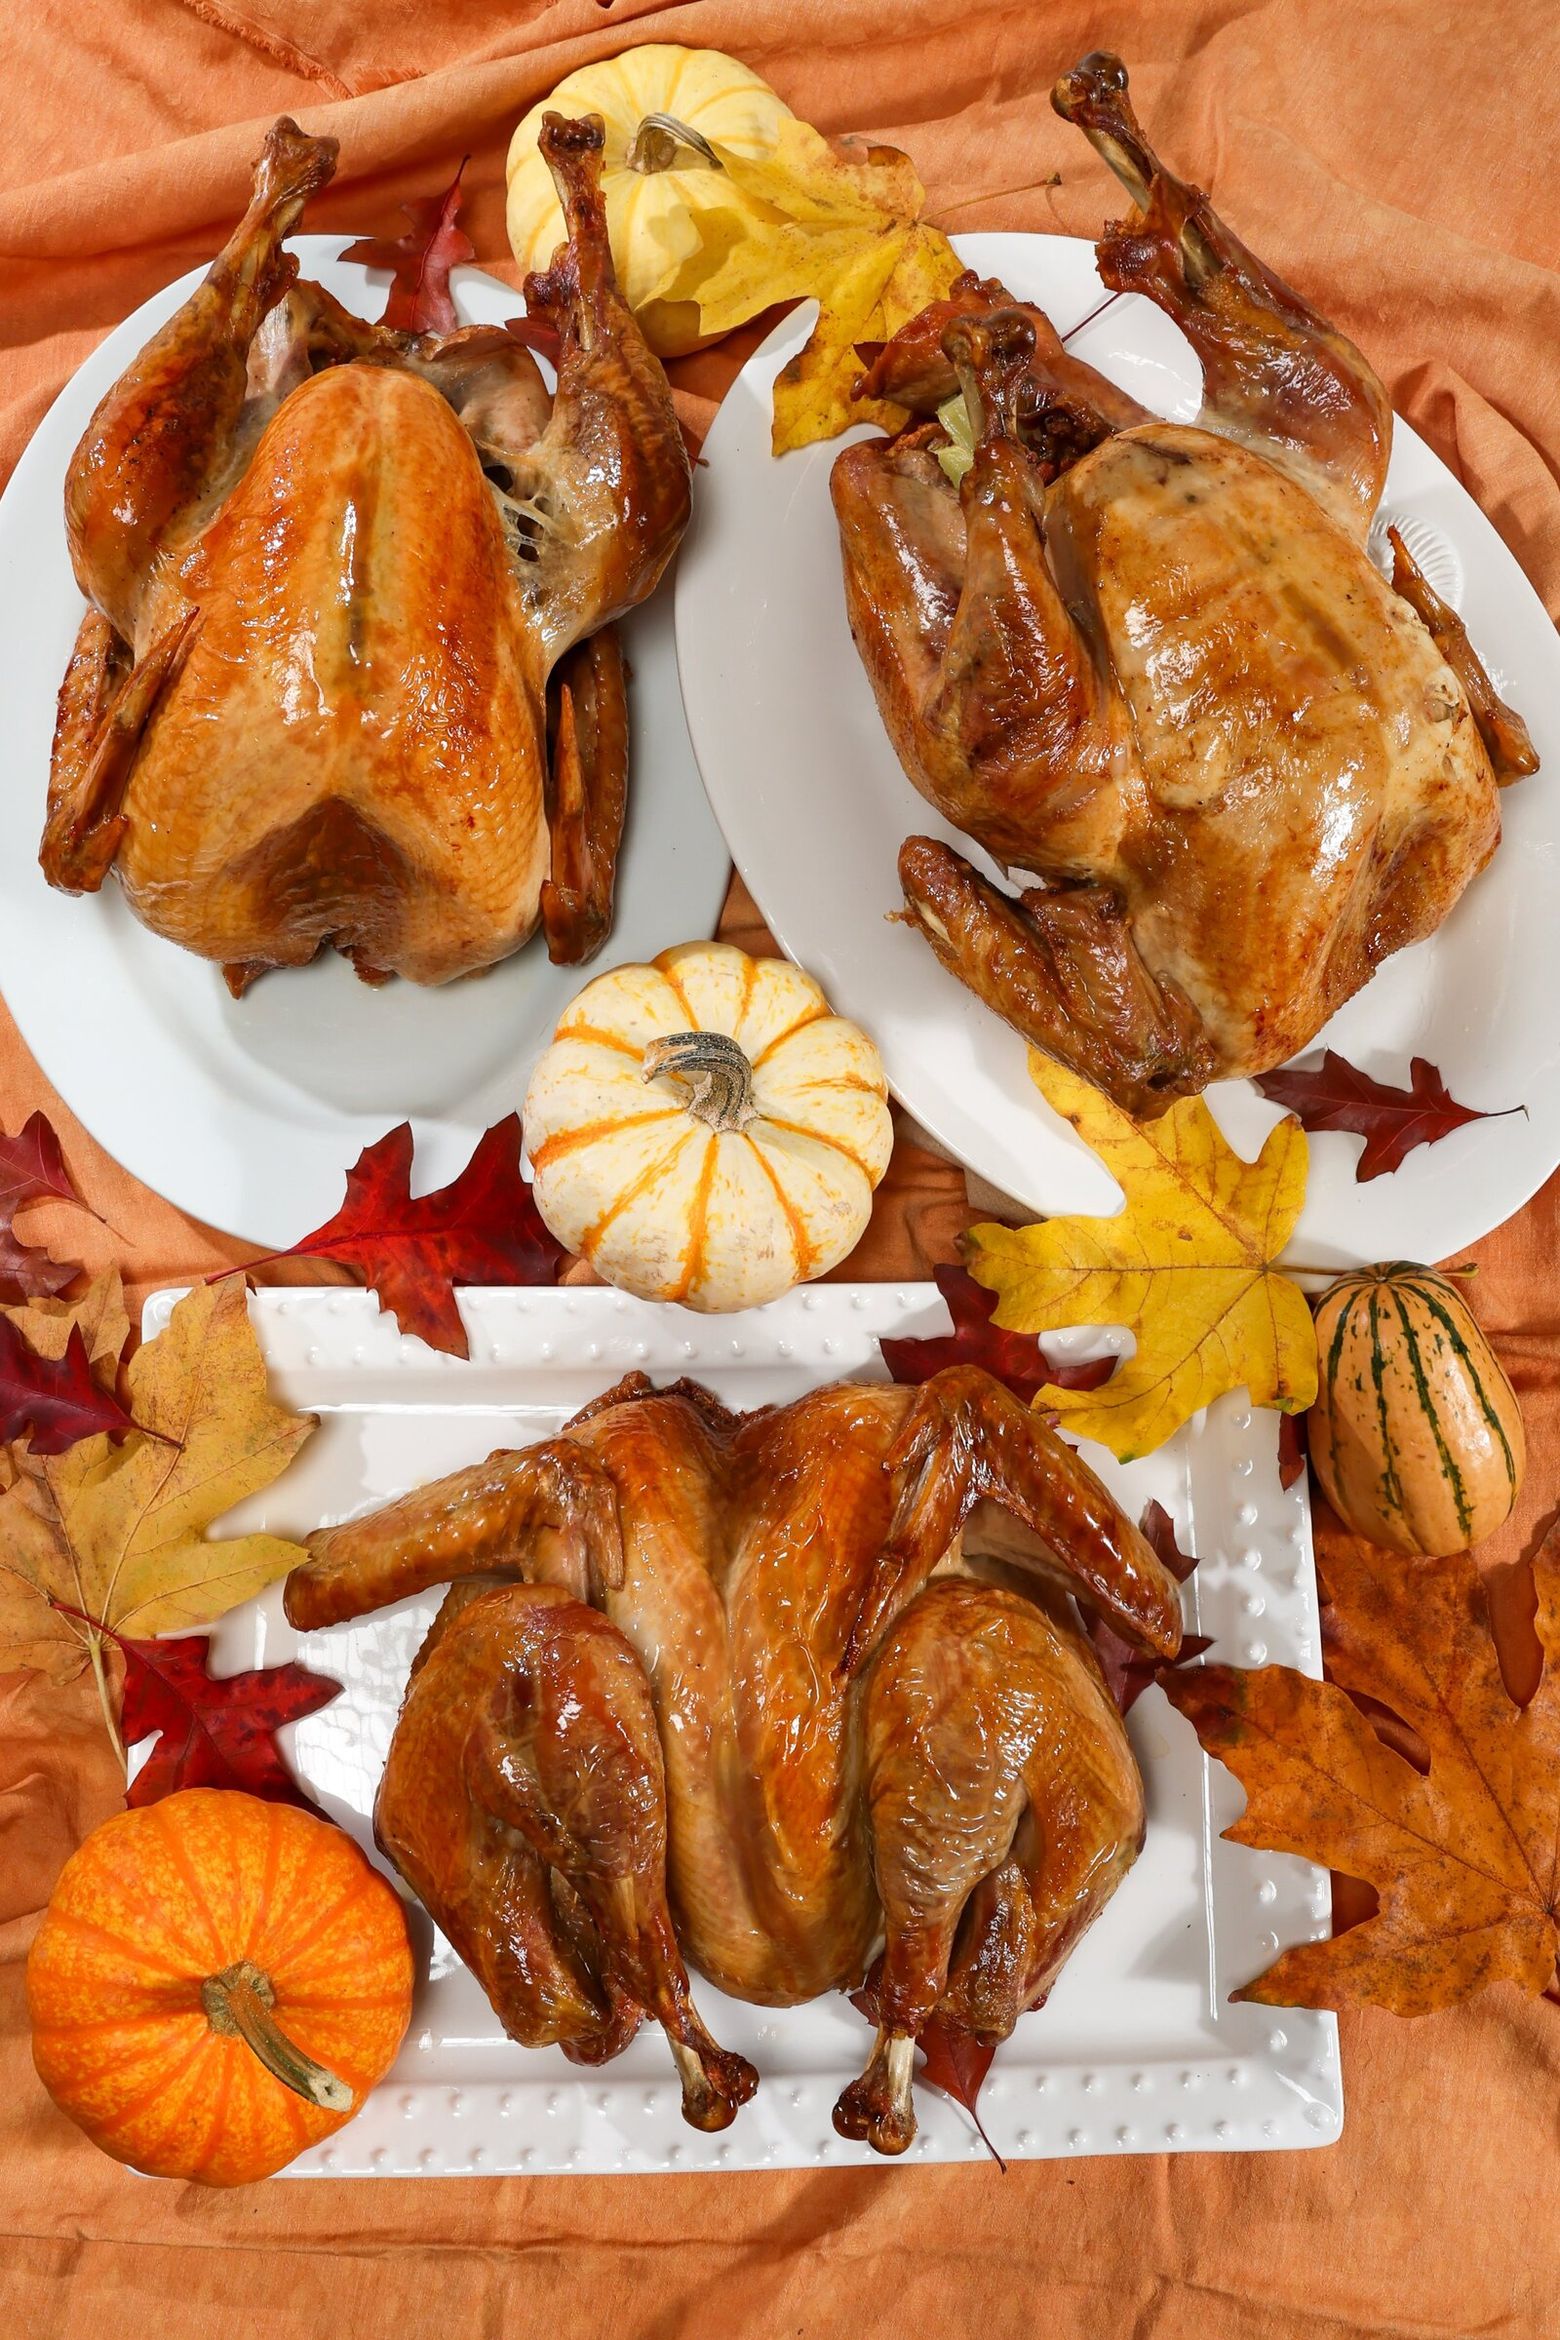 We taste-tested 3 turkey recipes to name a Thanksgiving dinner